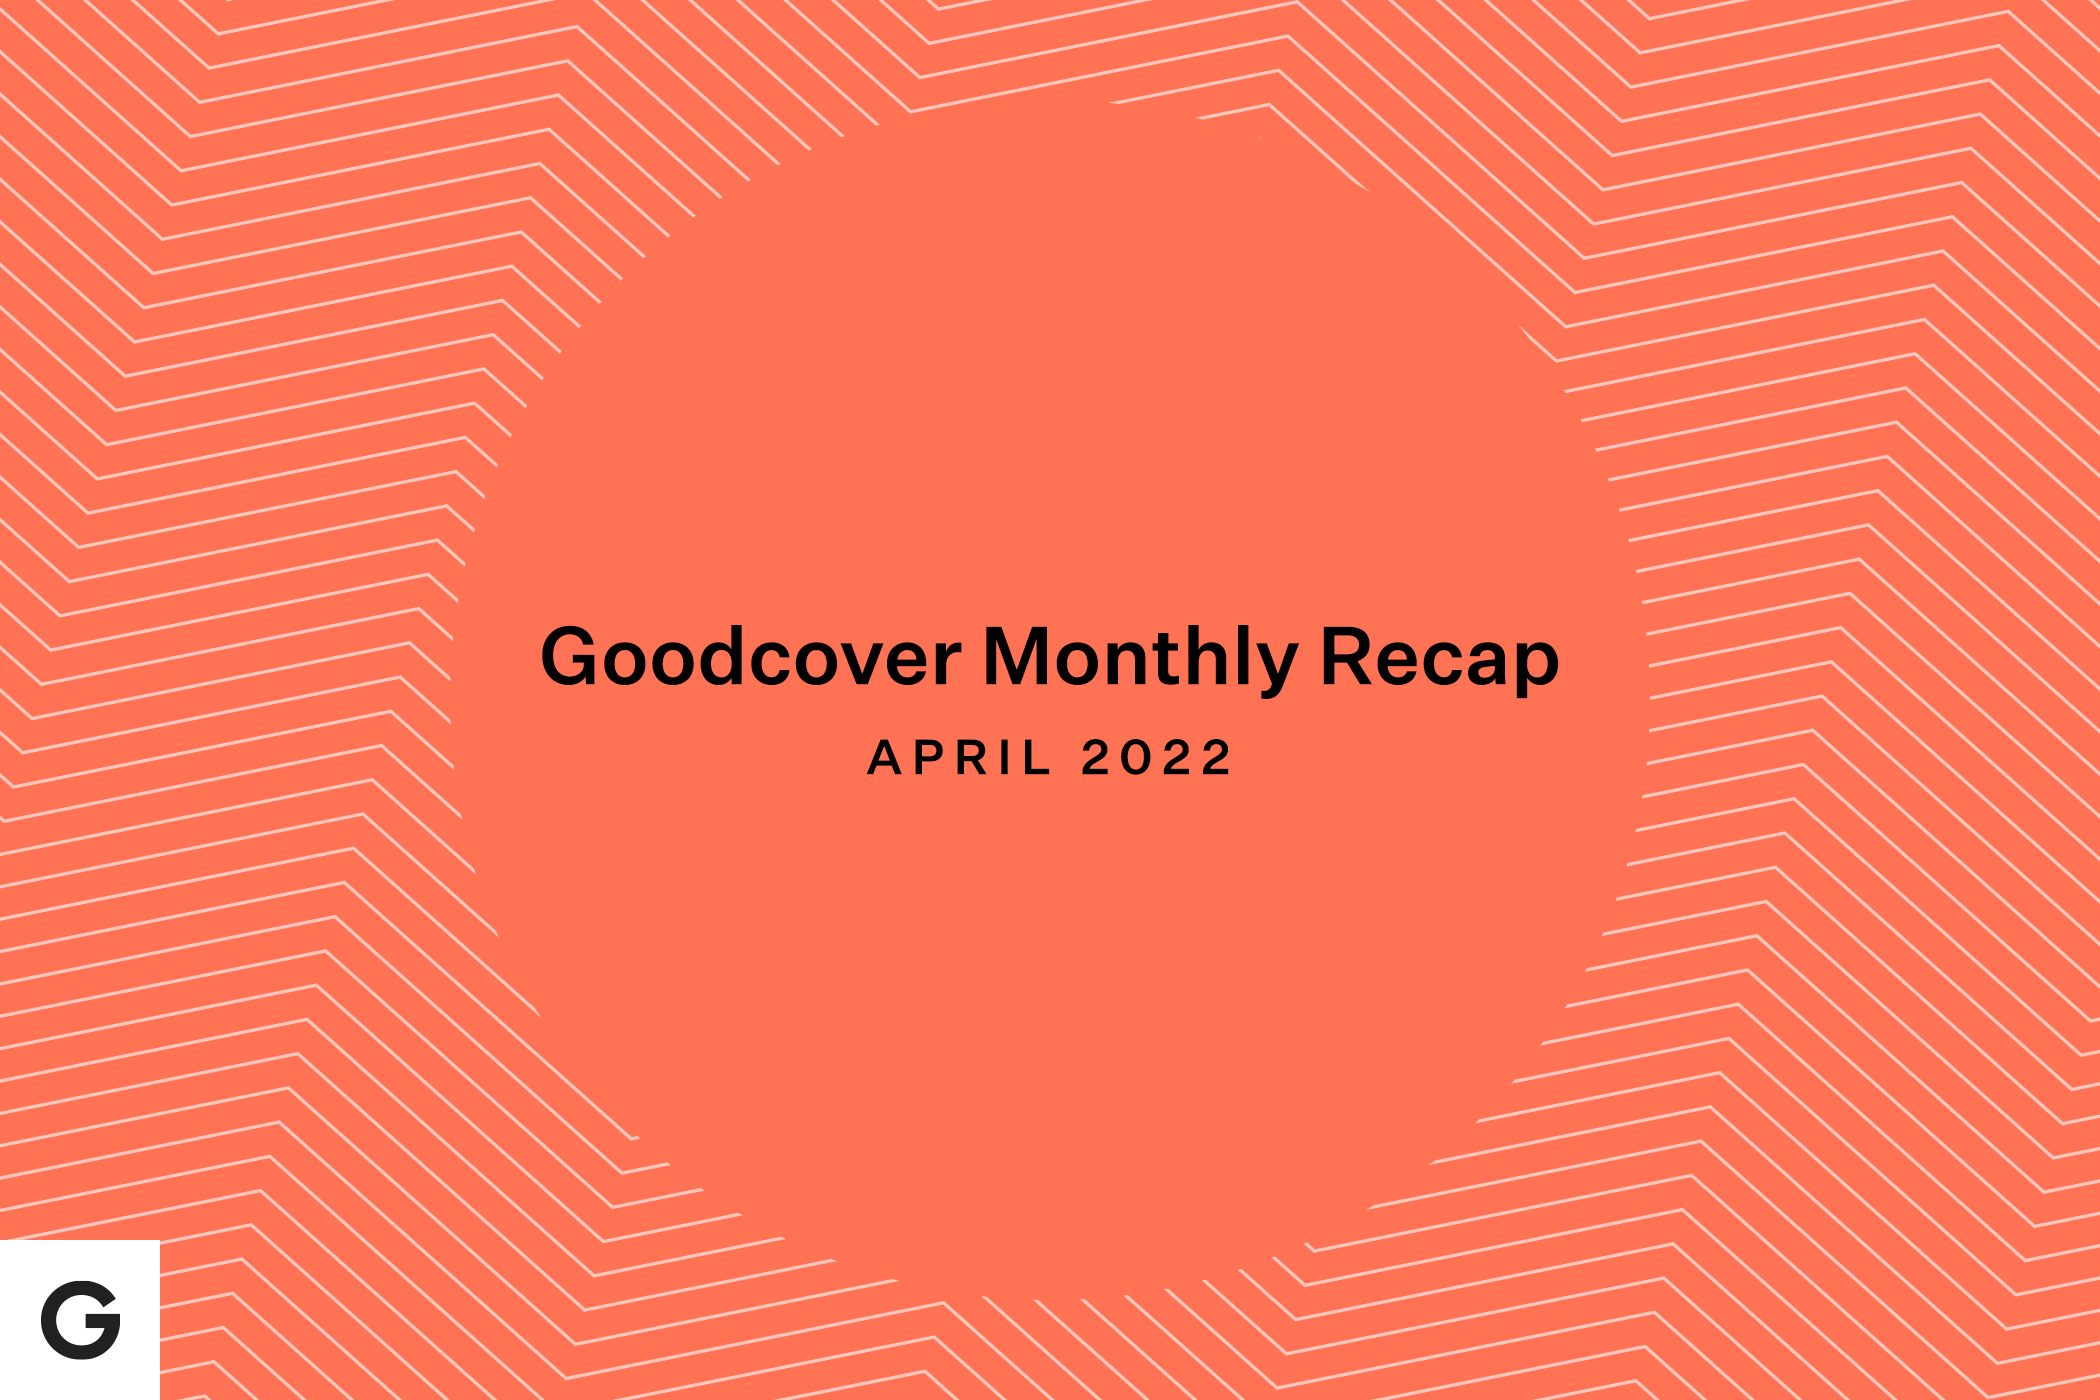 Goodcover Monthly News Recap for April 2022